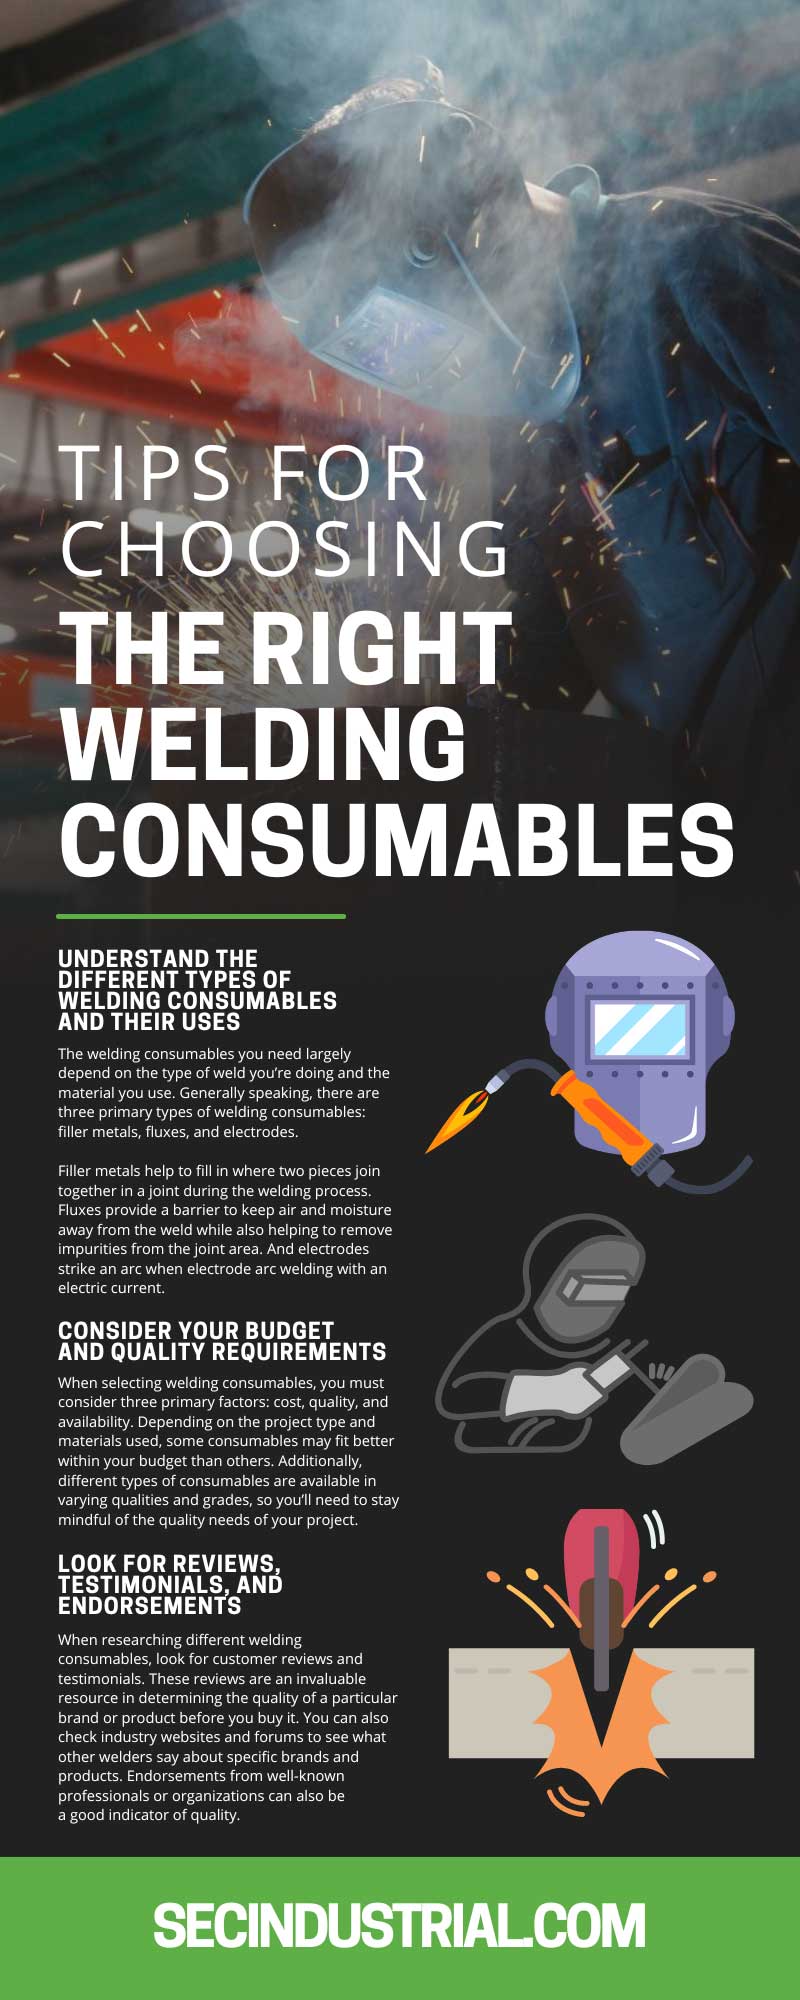 Tips for Choosing the Right Welding Consumables